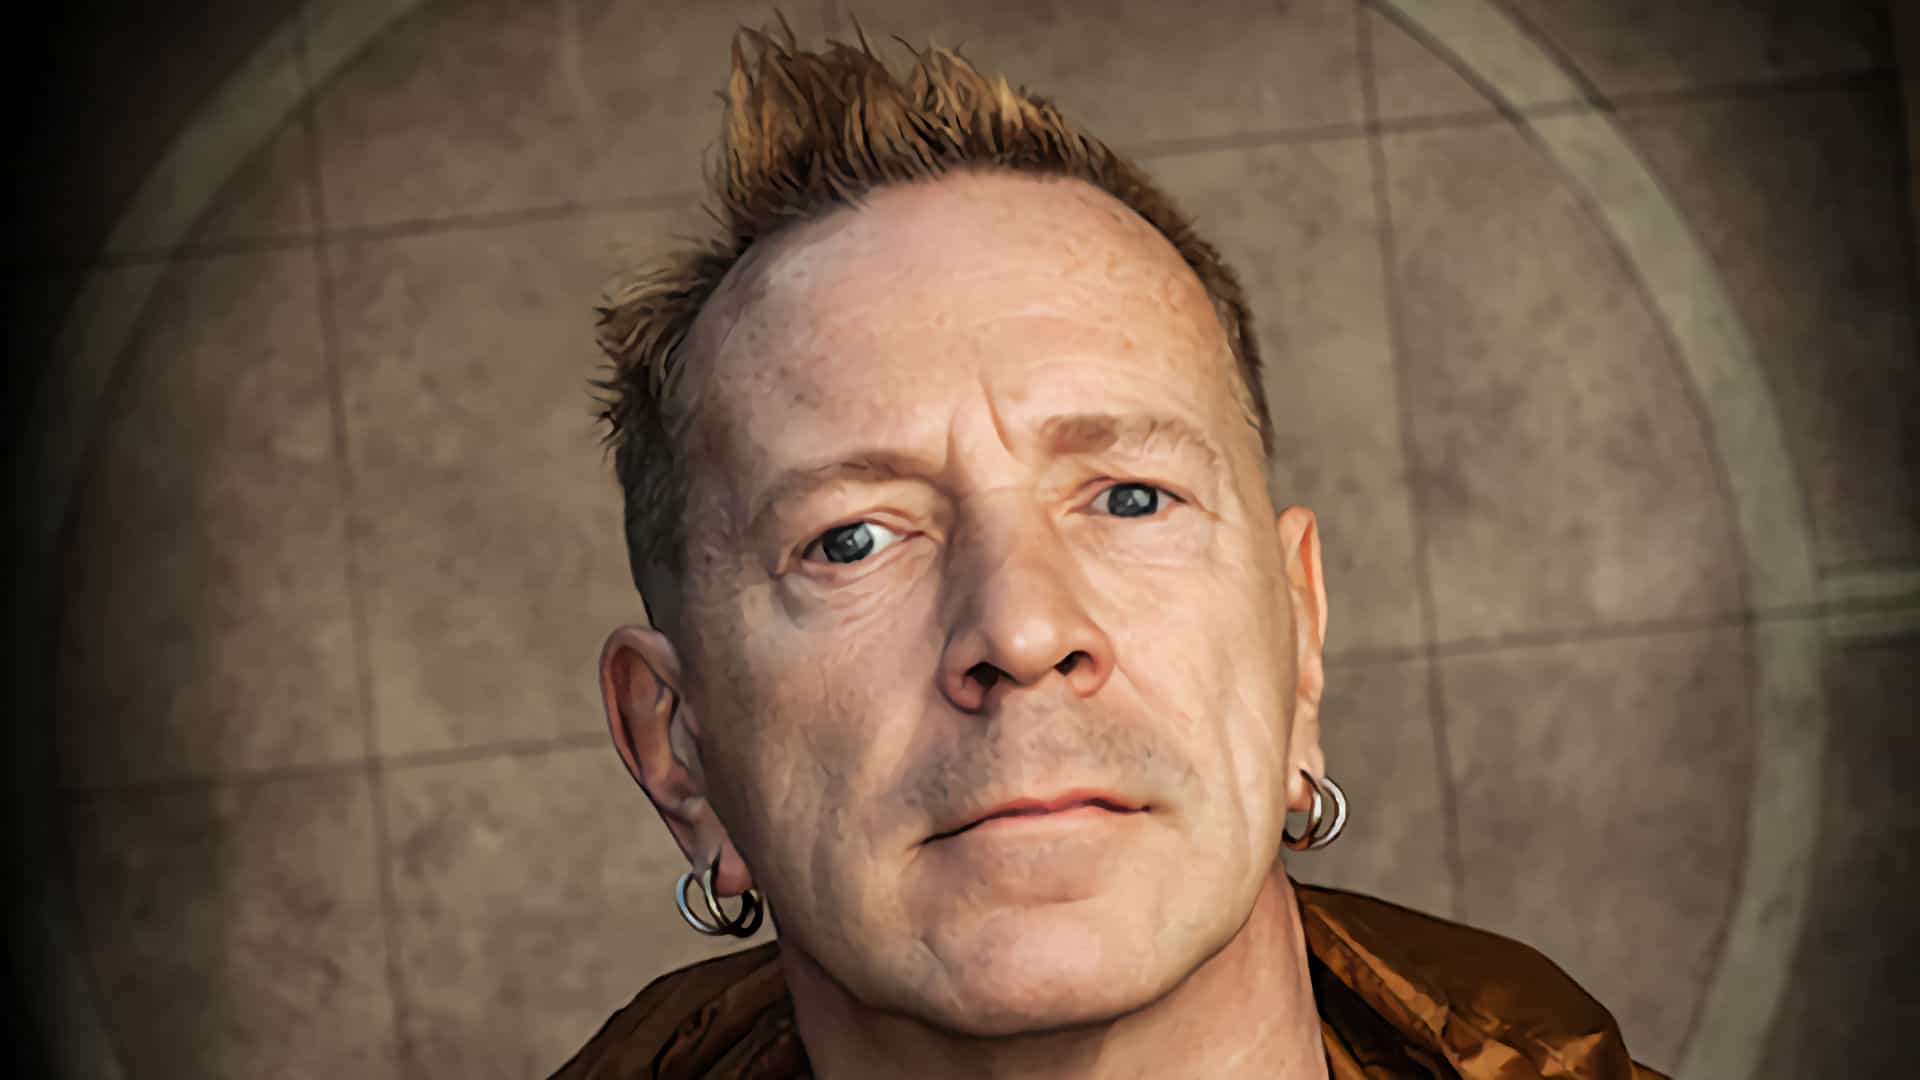 John Lydon - I Could Be Wrong, I Could Be Right